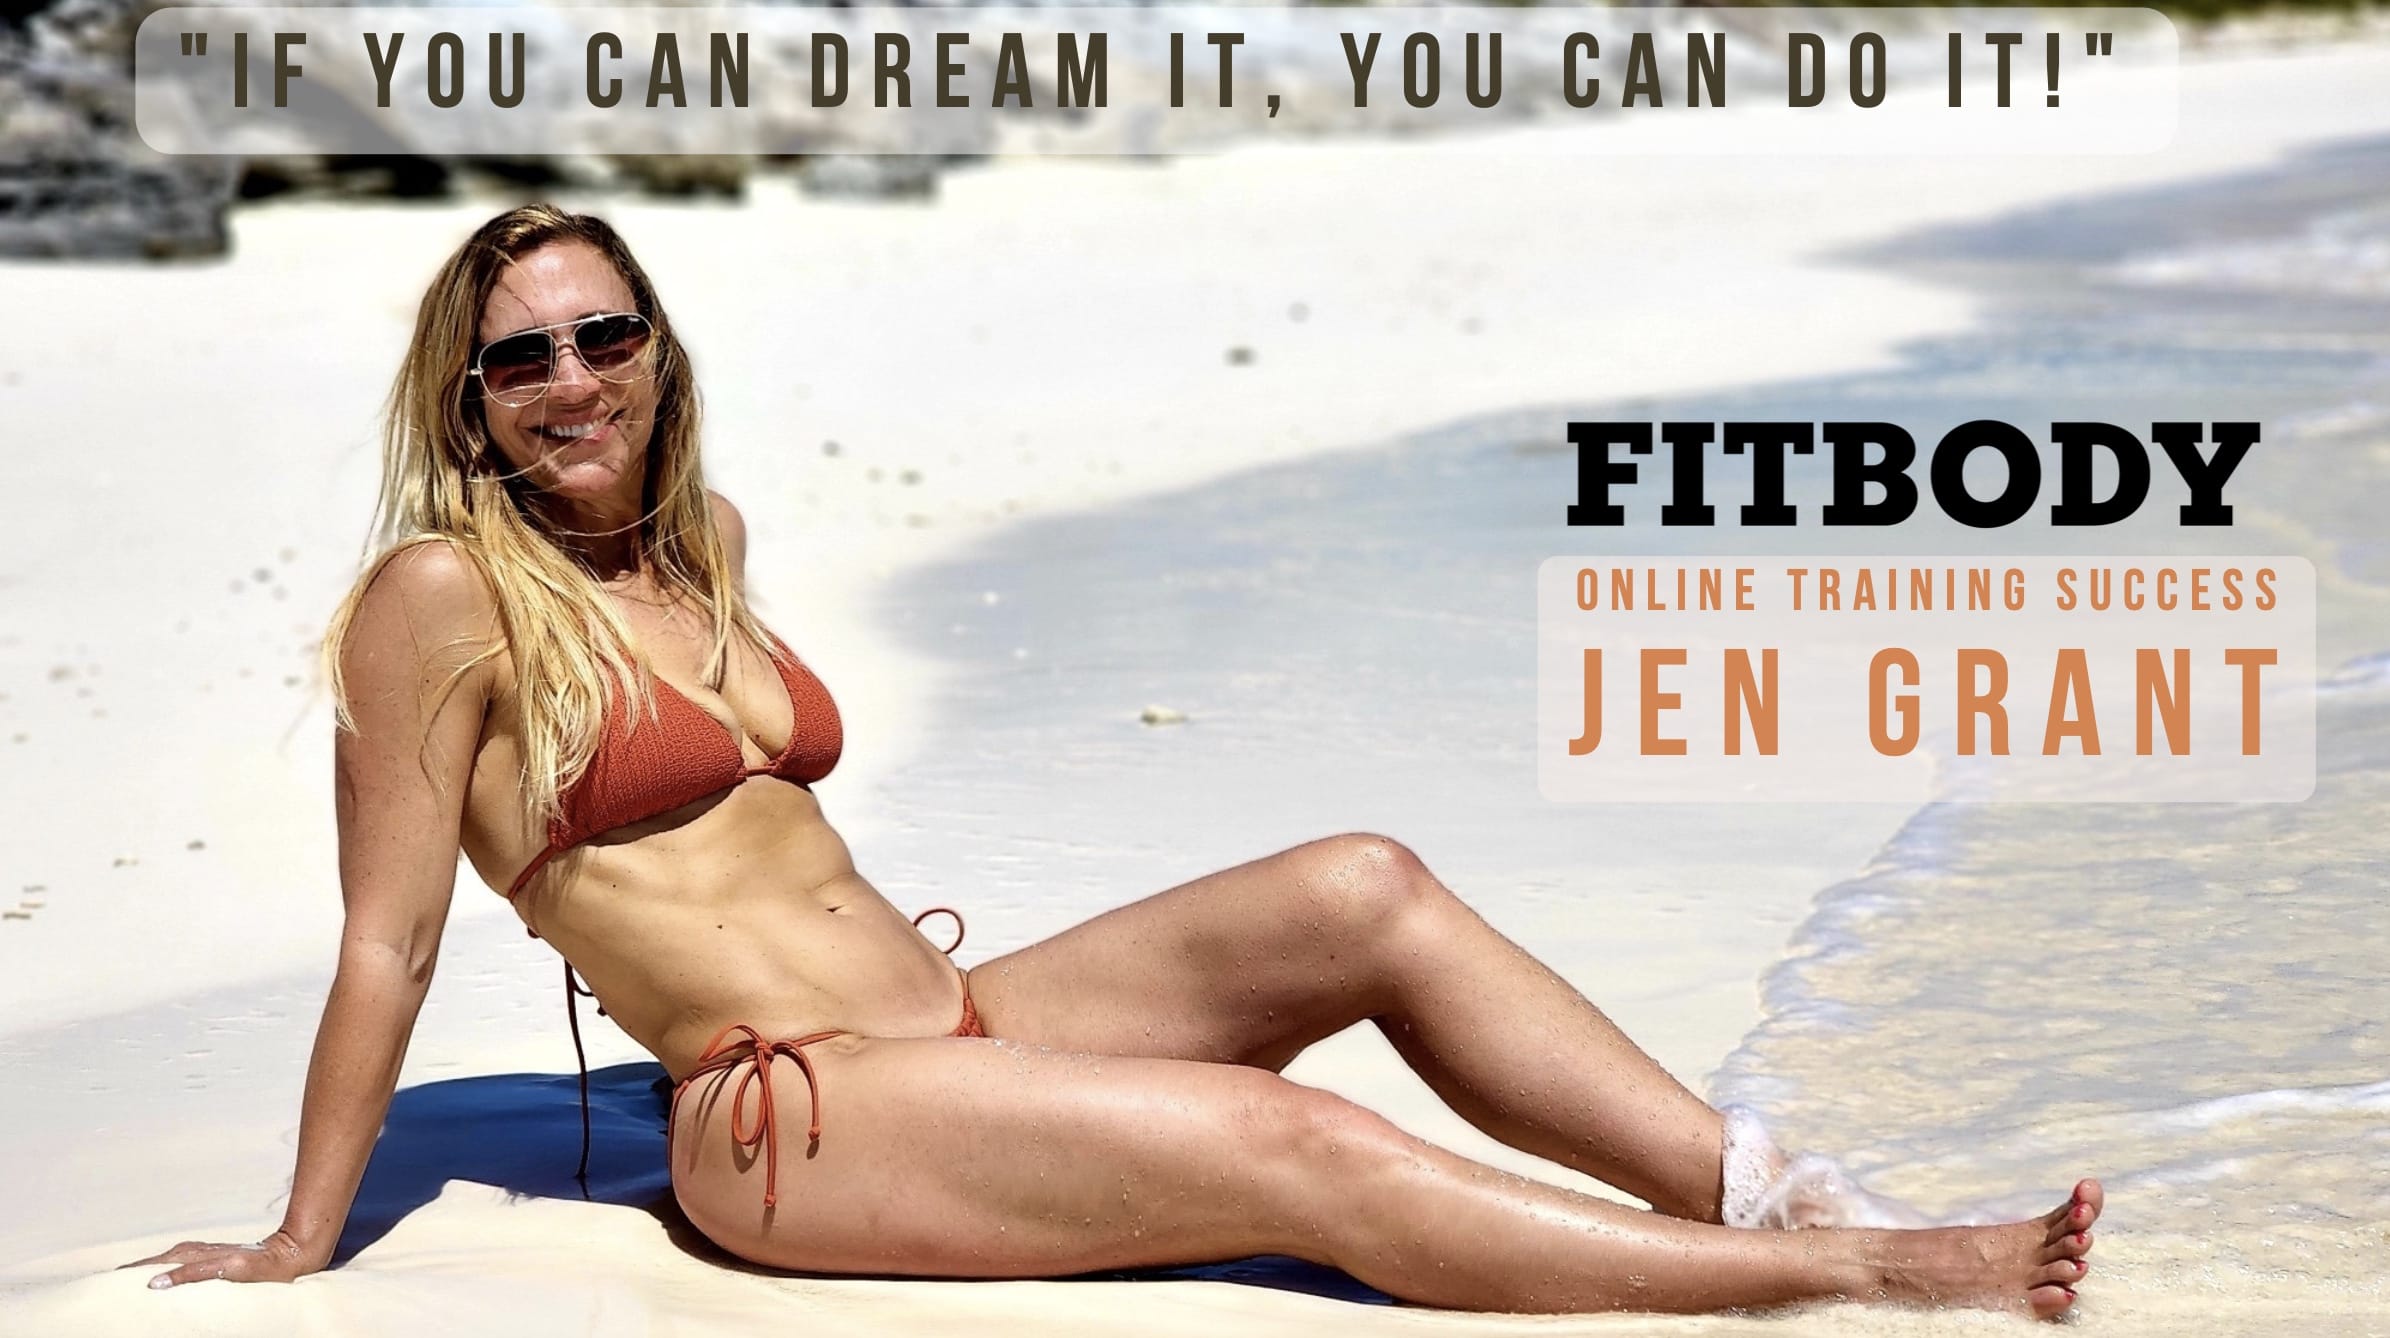 FITBODY Results Online Training Success